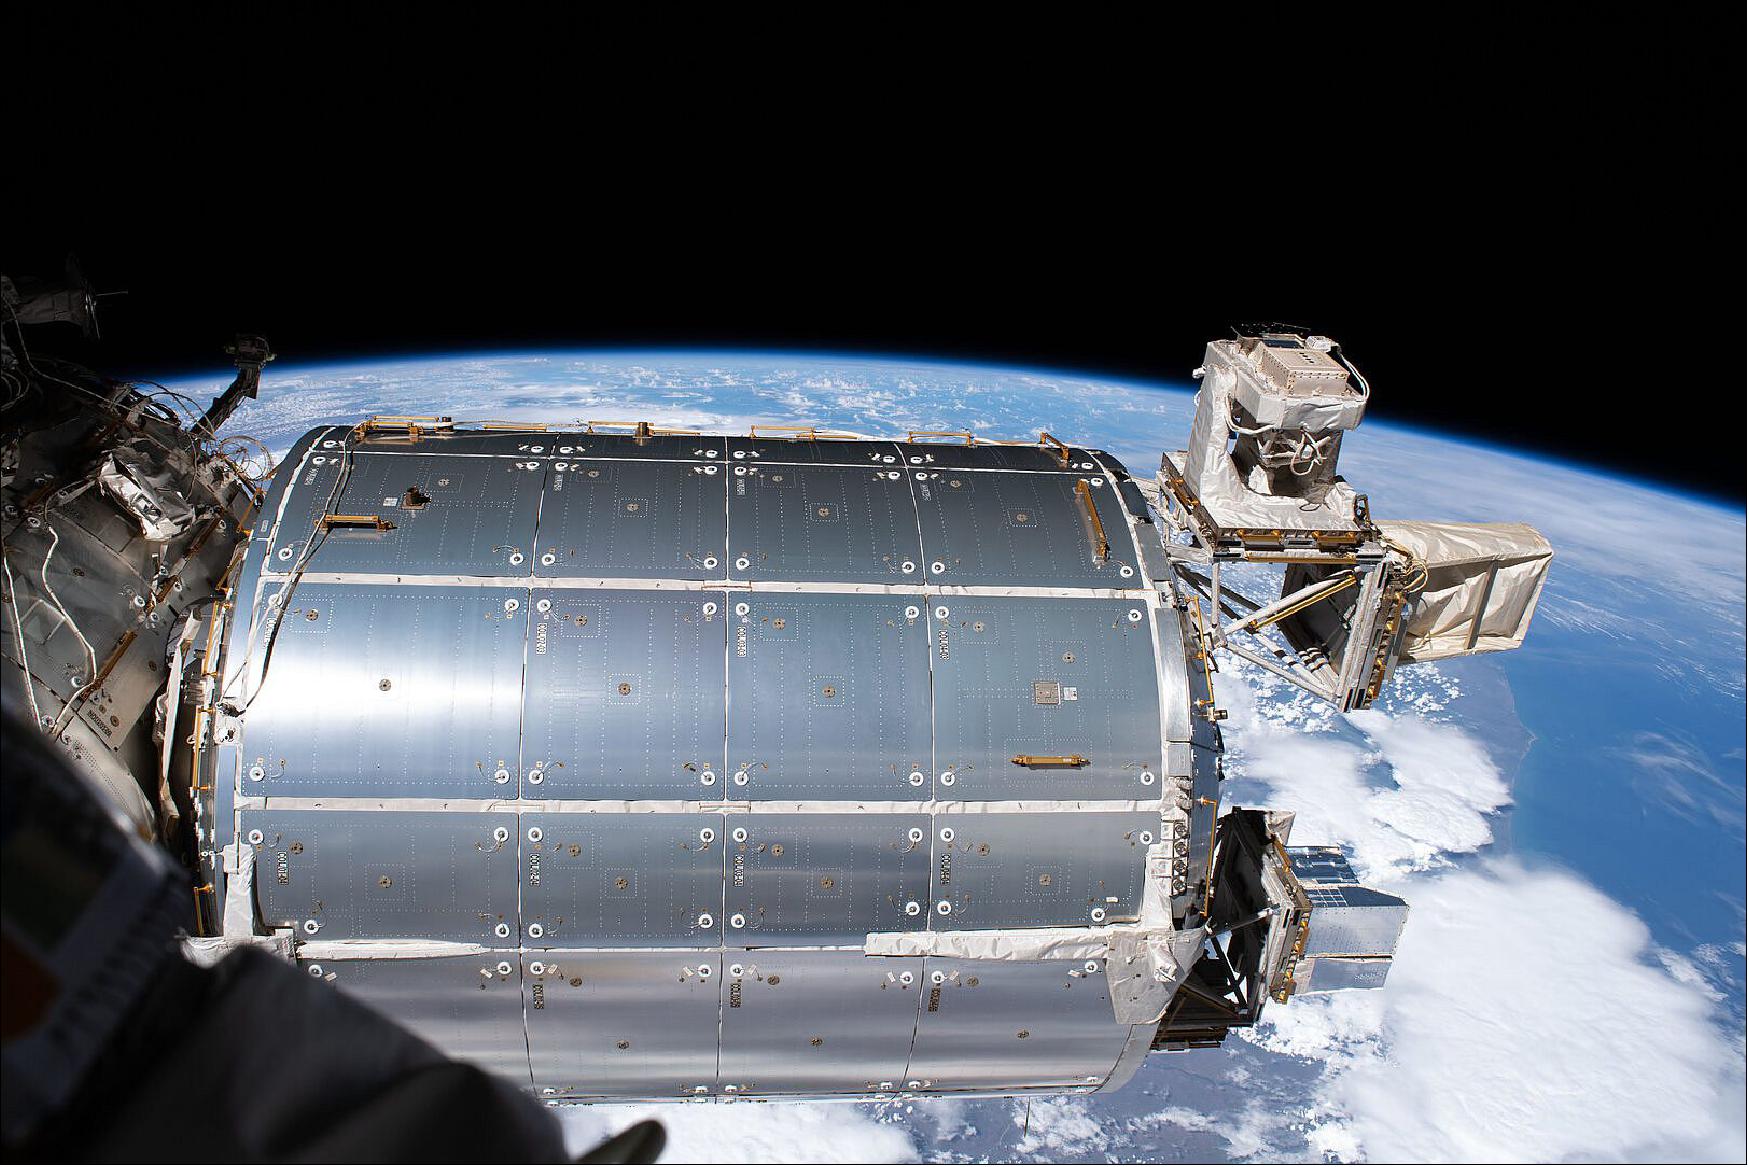 Figure 1: Astronauts aboard the ISS plan to install a high-speed radio link to enable almost real-time connections with Earth. This image of the Columbus module was taken by ESA astronaut Luca Parmitano from outside the ISS on the second spacewalk to service the cosmic ray detecting Alpha Magnetic Spectrometer (AMS-02) on November 22, 2019 (image credit: ESA)